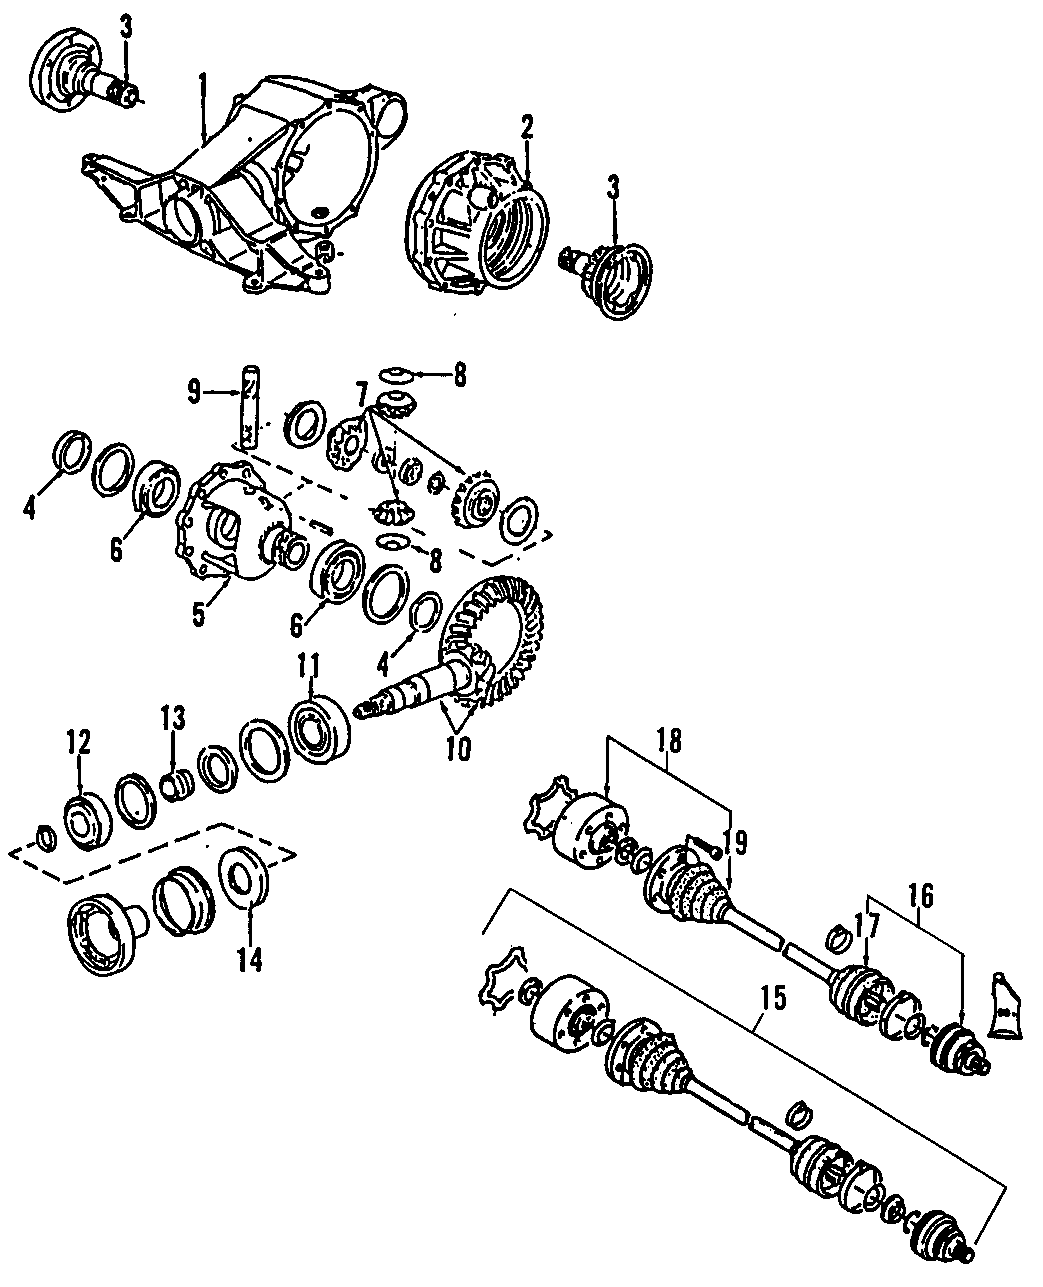 15DRIVE AXLES. REAR AXLE. AXLE SHAFTS & JOINTS. DIFFERENTIAL. PROPELLER SHAFT.https://images.simplepart.com/images/parts/motor/fullsize/E255240.png